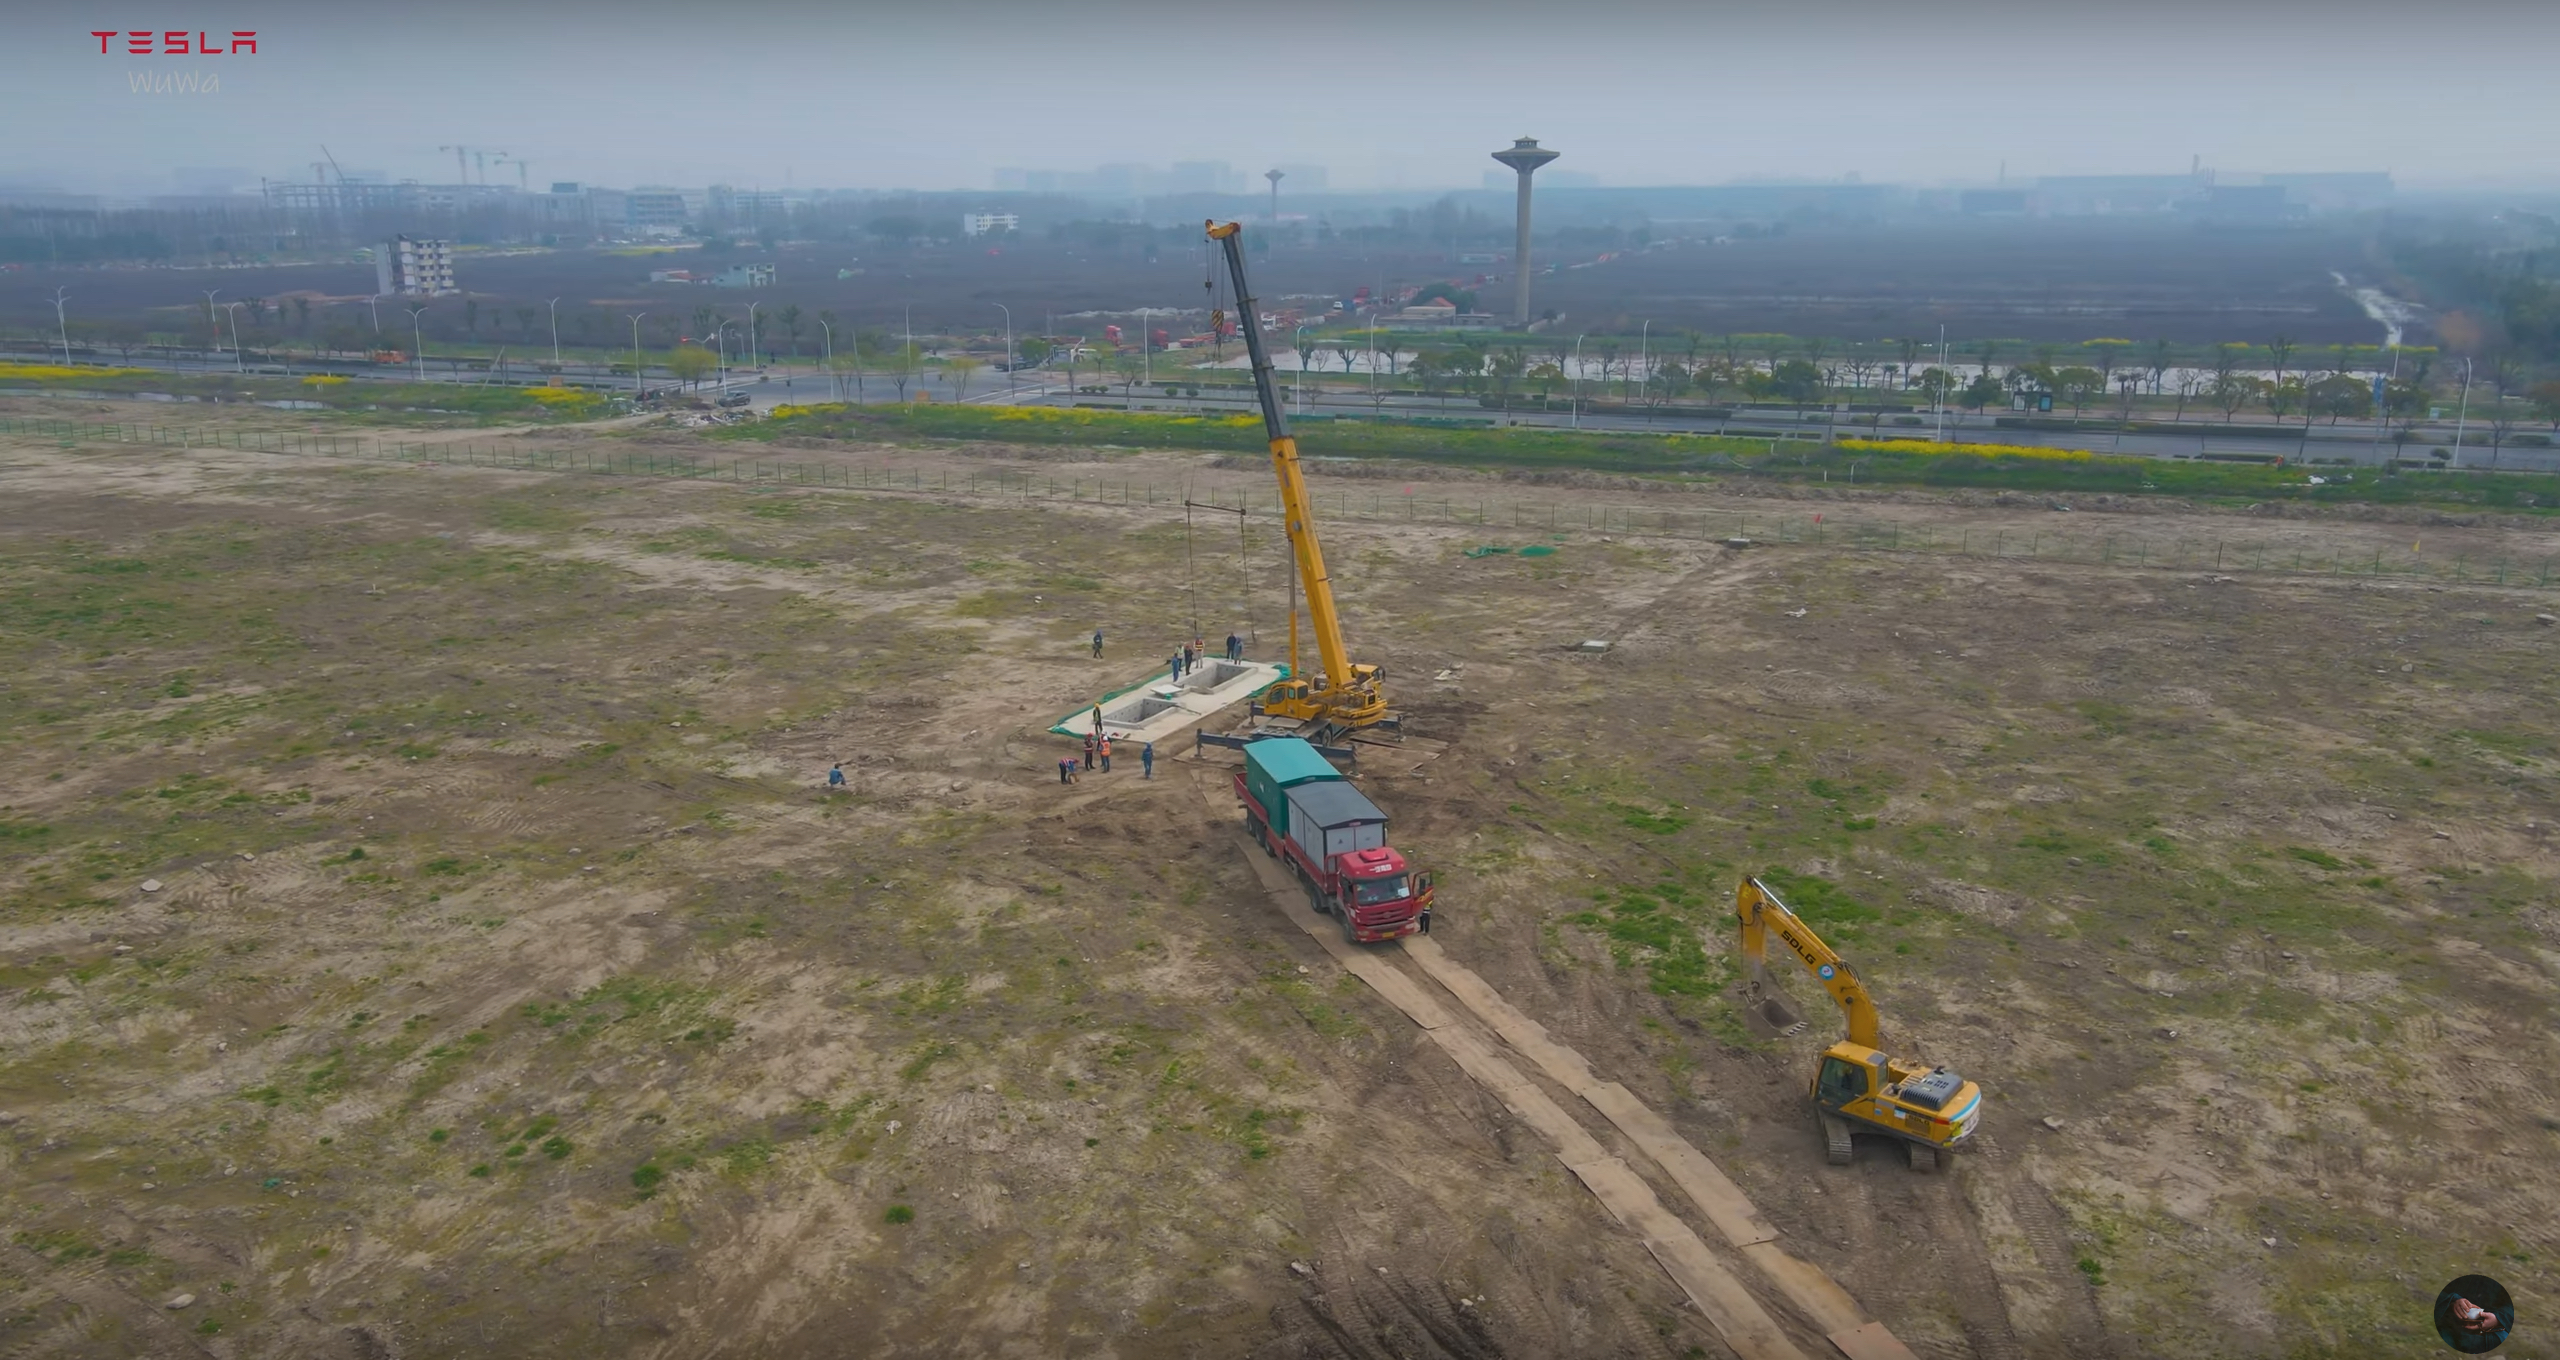 Tesla appears to be starting Megafactory Shanghai construction